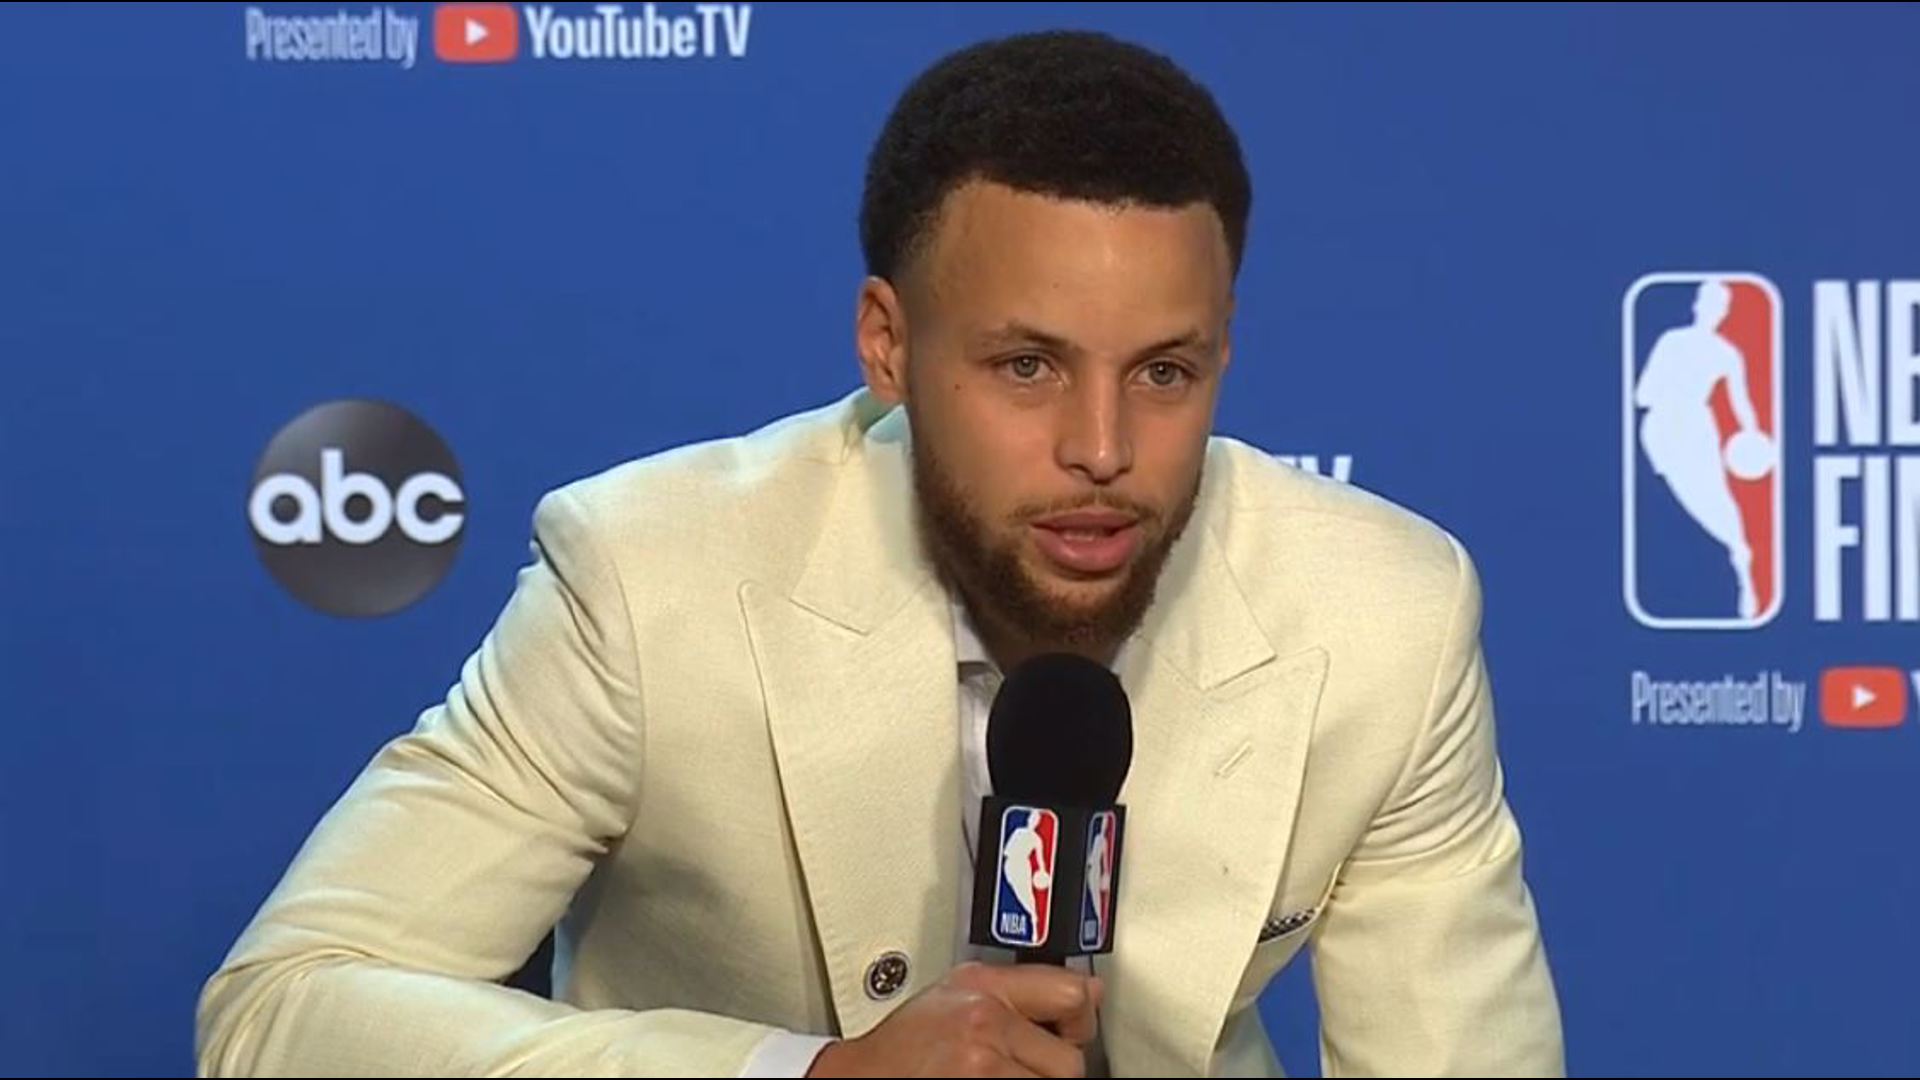 Warriors point guard Stephen Curry talks about the loss in Game 6 of the NBA Finals to give the Toronto Raptors their first NBA title, the loss of Klay Thompson to a knee injury, the final game played in Oakland at Oracle Arena and the future of the team contending for a championship.